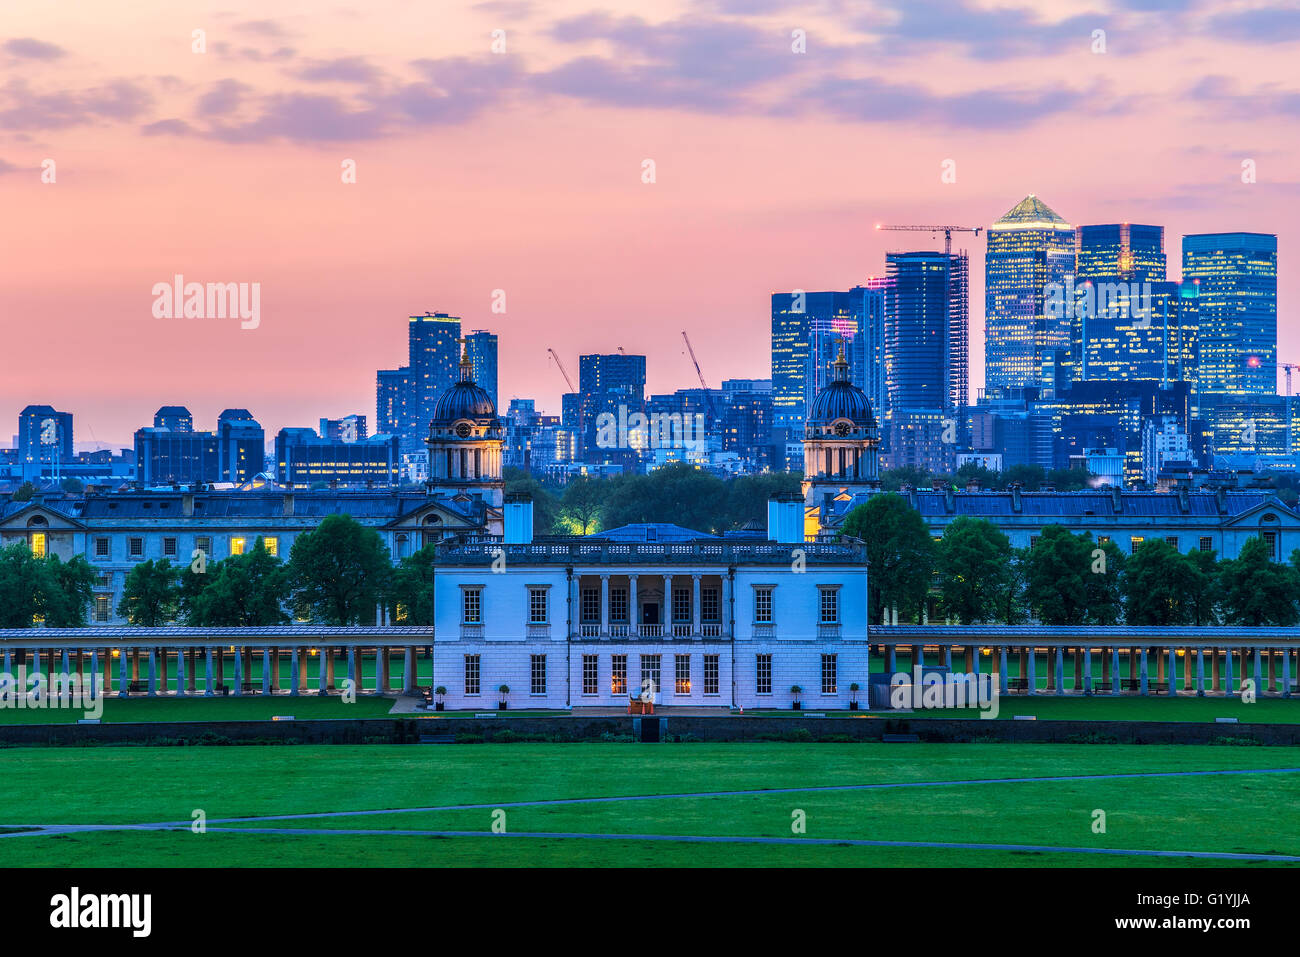 View of Queens House and Canary Wharf from Greenwich Park, London with a sunset sky Stock Photo